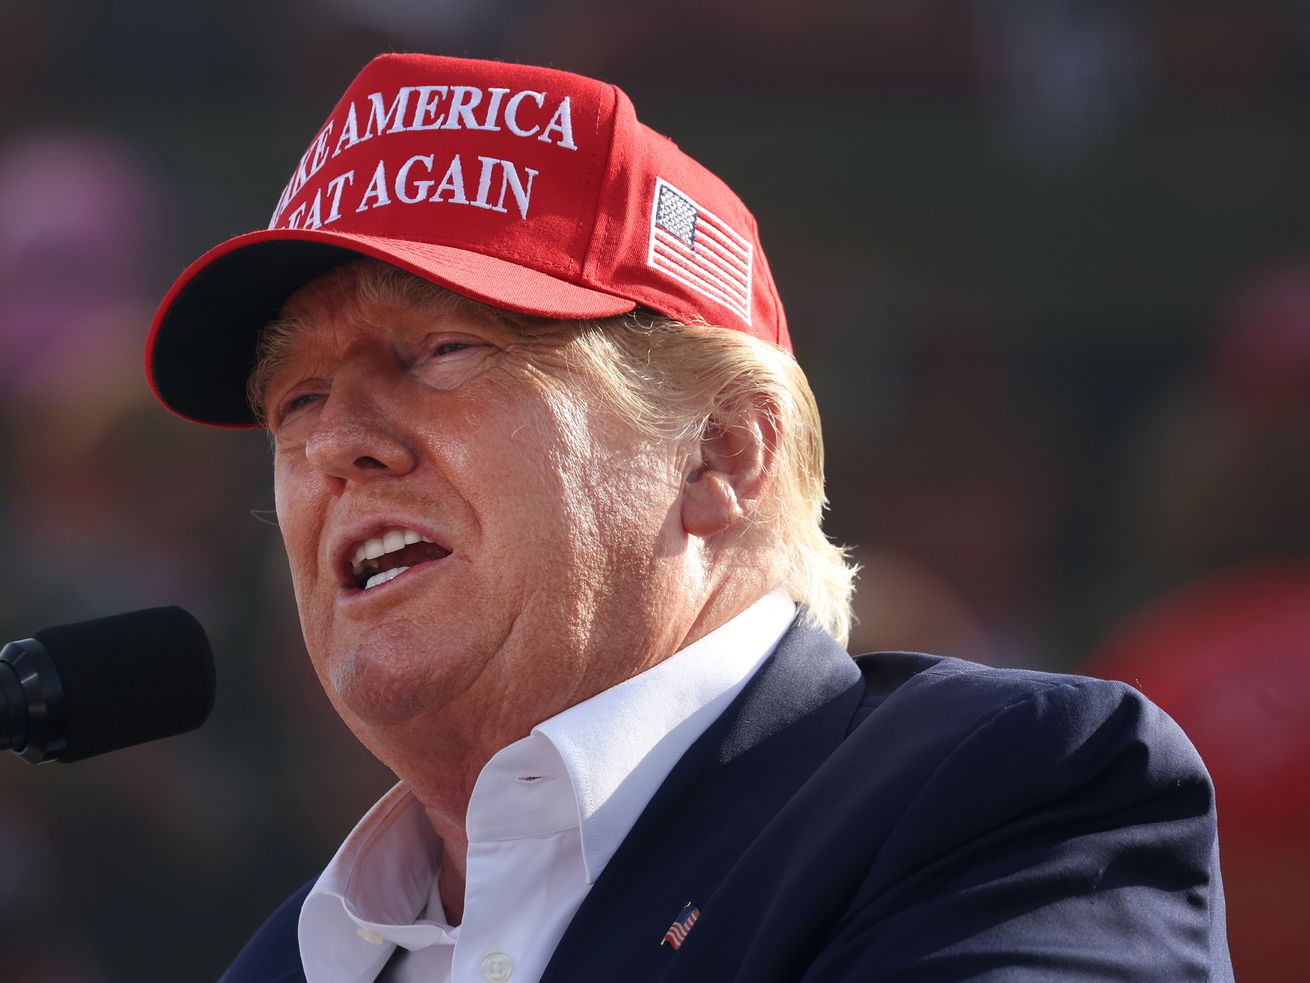 Donald Trump speaking into a microphone while wearing a “Make America Great Again” hat.